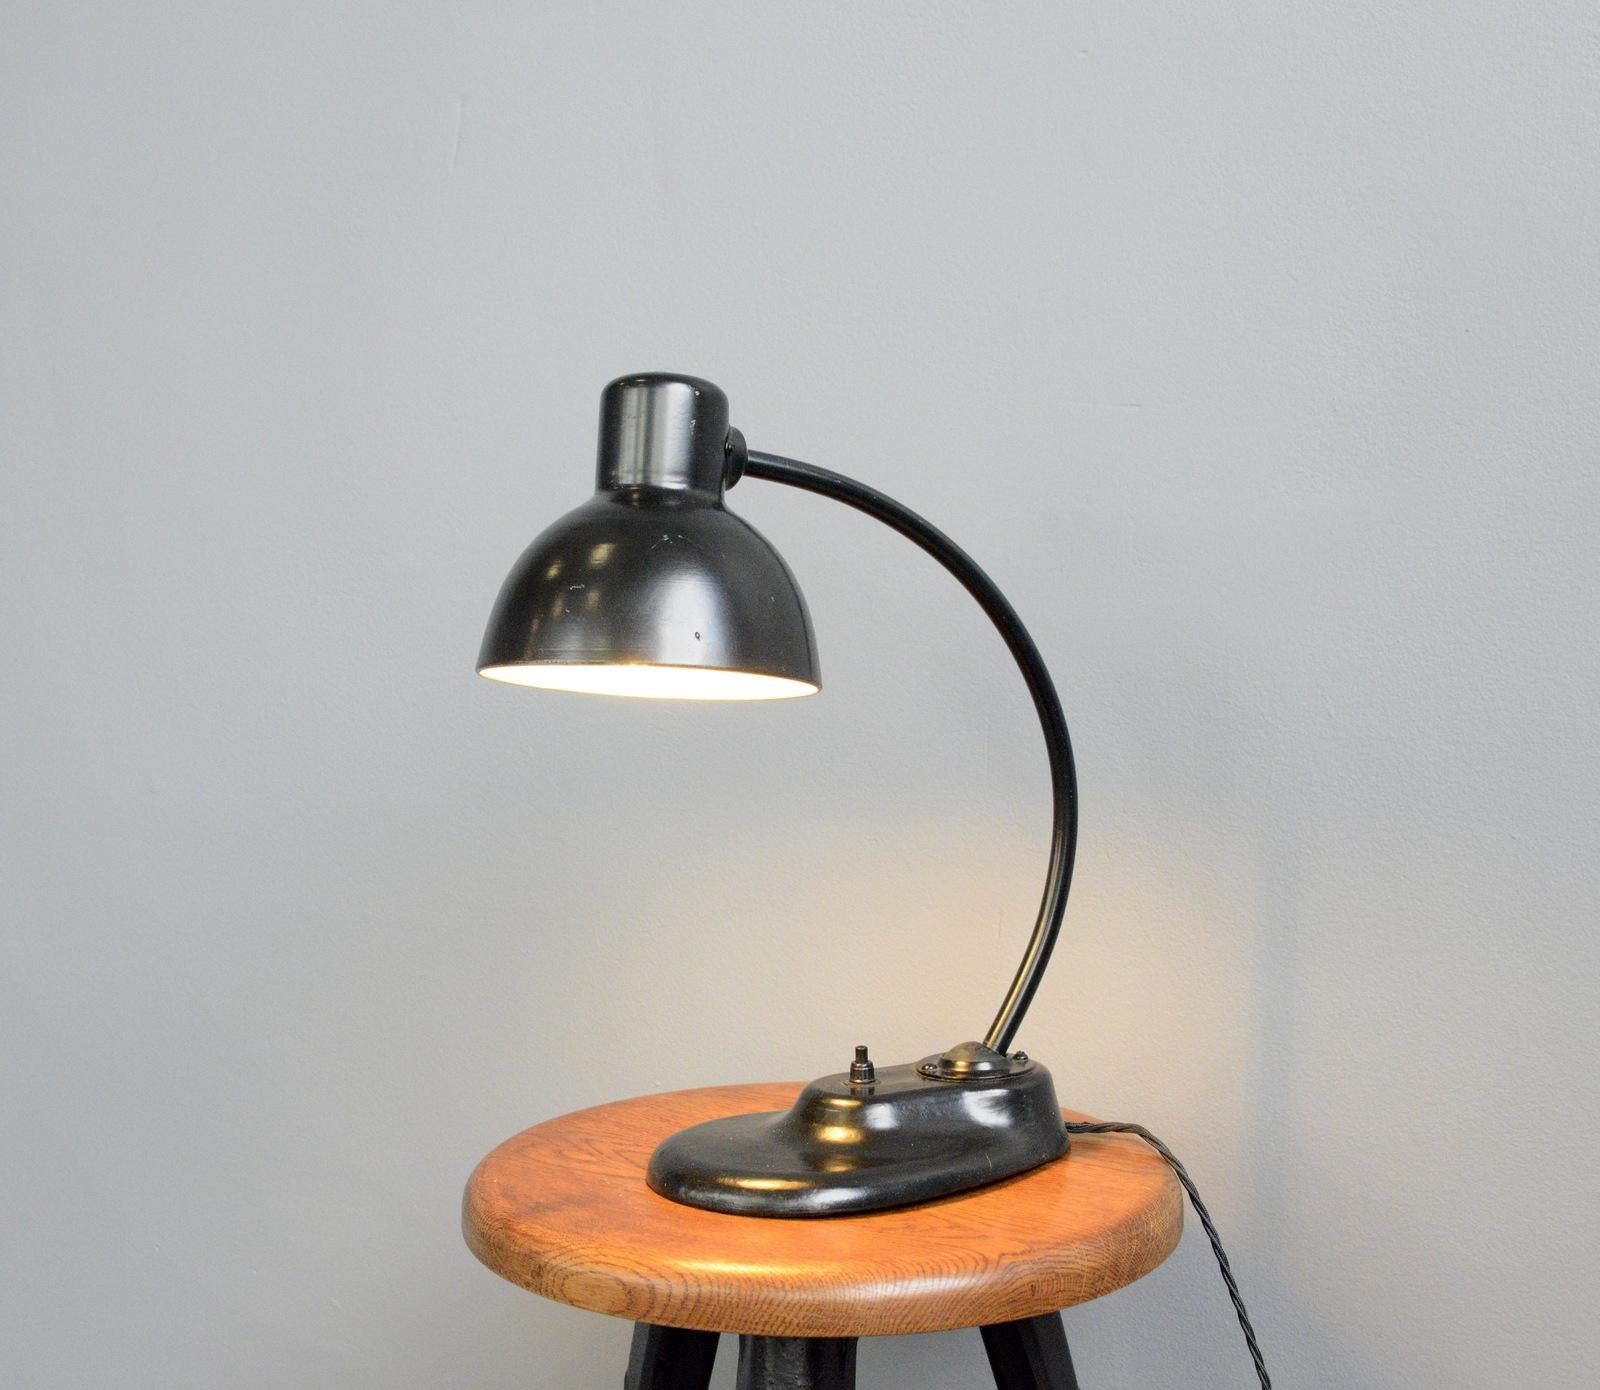 Model 1115 table lamp by Kandem, circa 1930s


Kandem

German lamp manufacturer Kandem was founded in Leipzig in 1889. From its establishment in 1919 Kandem was always closely connected with the Bauhaus school, purchasing and manufacturing many